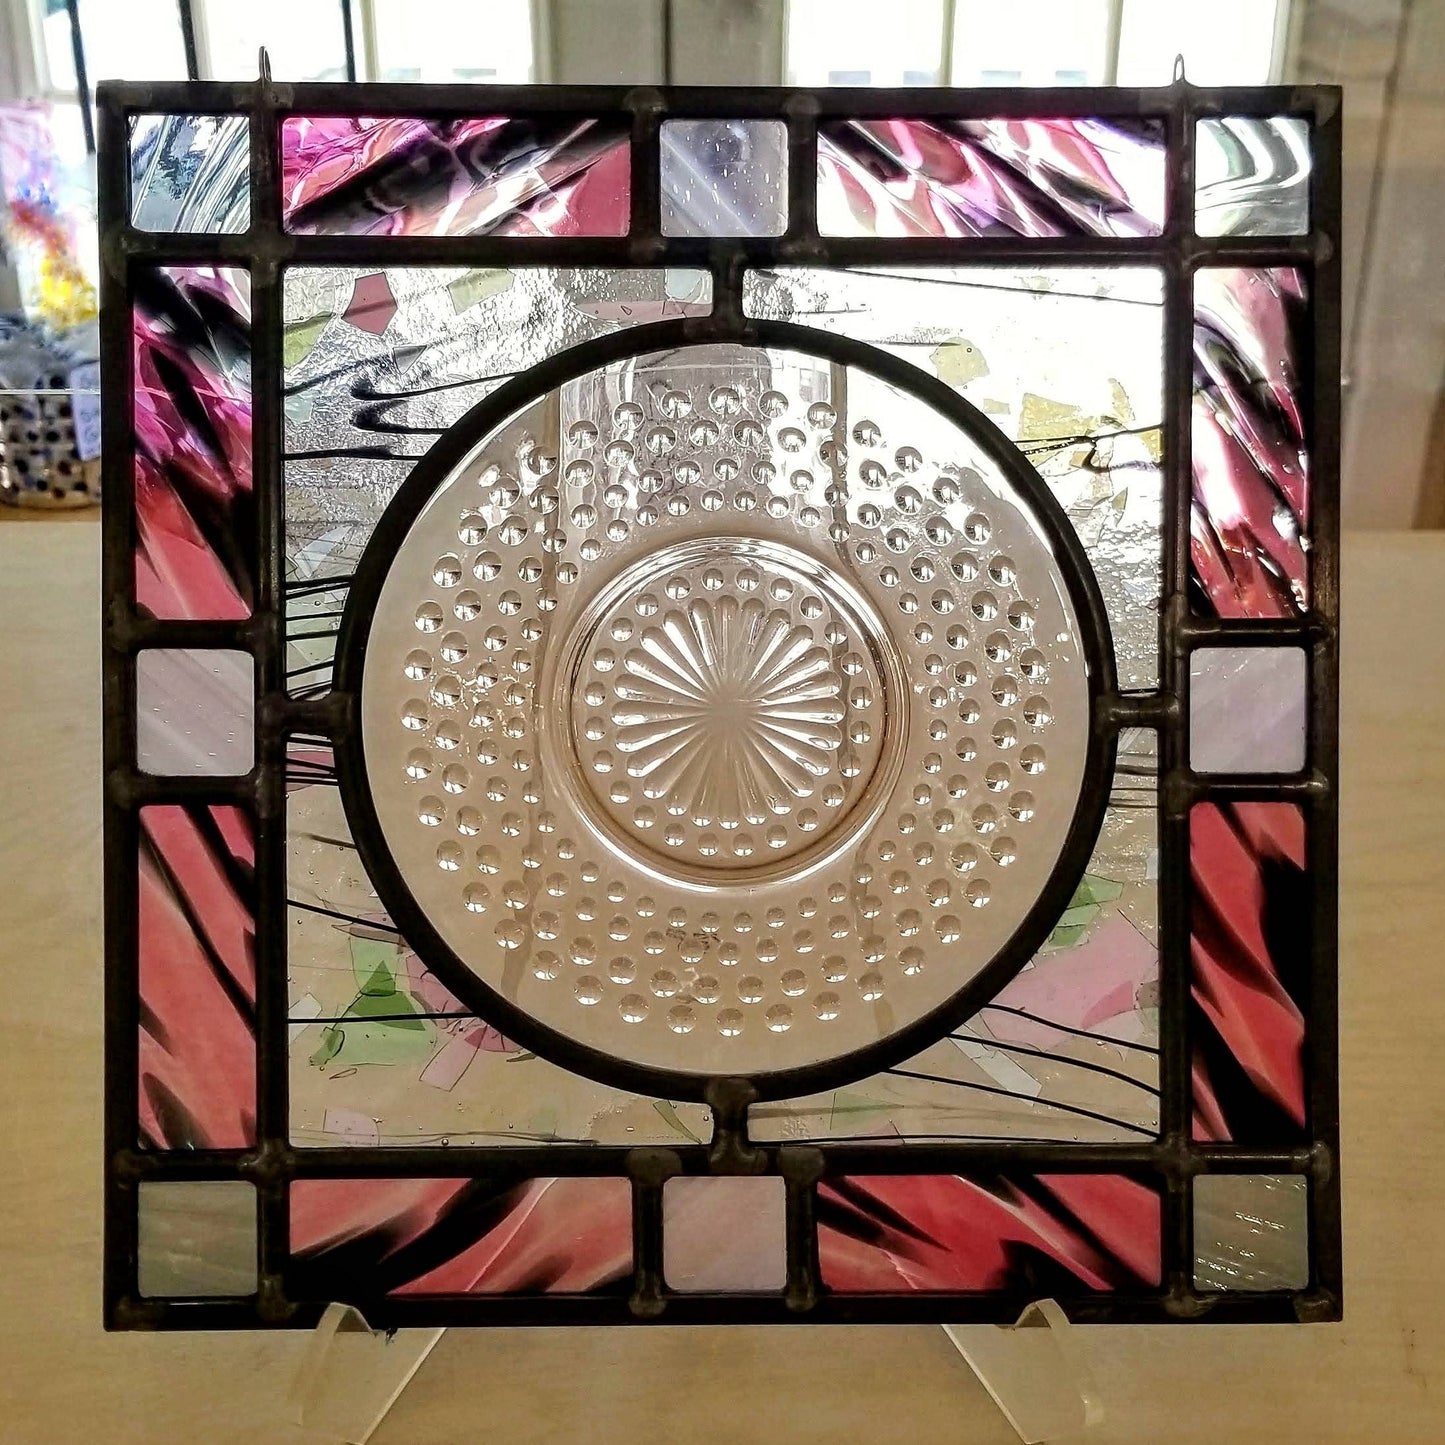 Retro Saucer, Surrounded by Unusual & Pretty Textures. Traditional Leaded Stained Glass Panel. Enlarge photo for sparkly glass details!